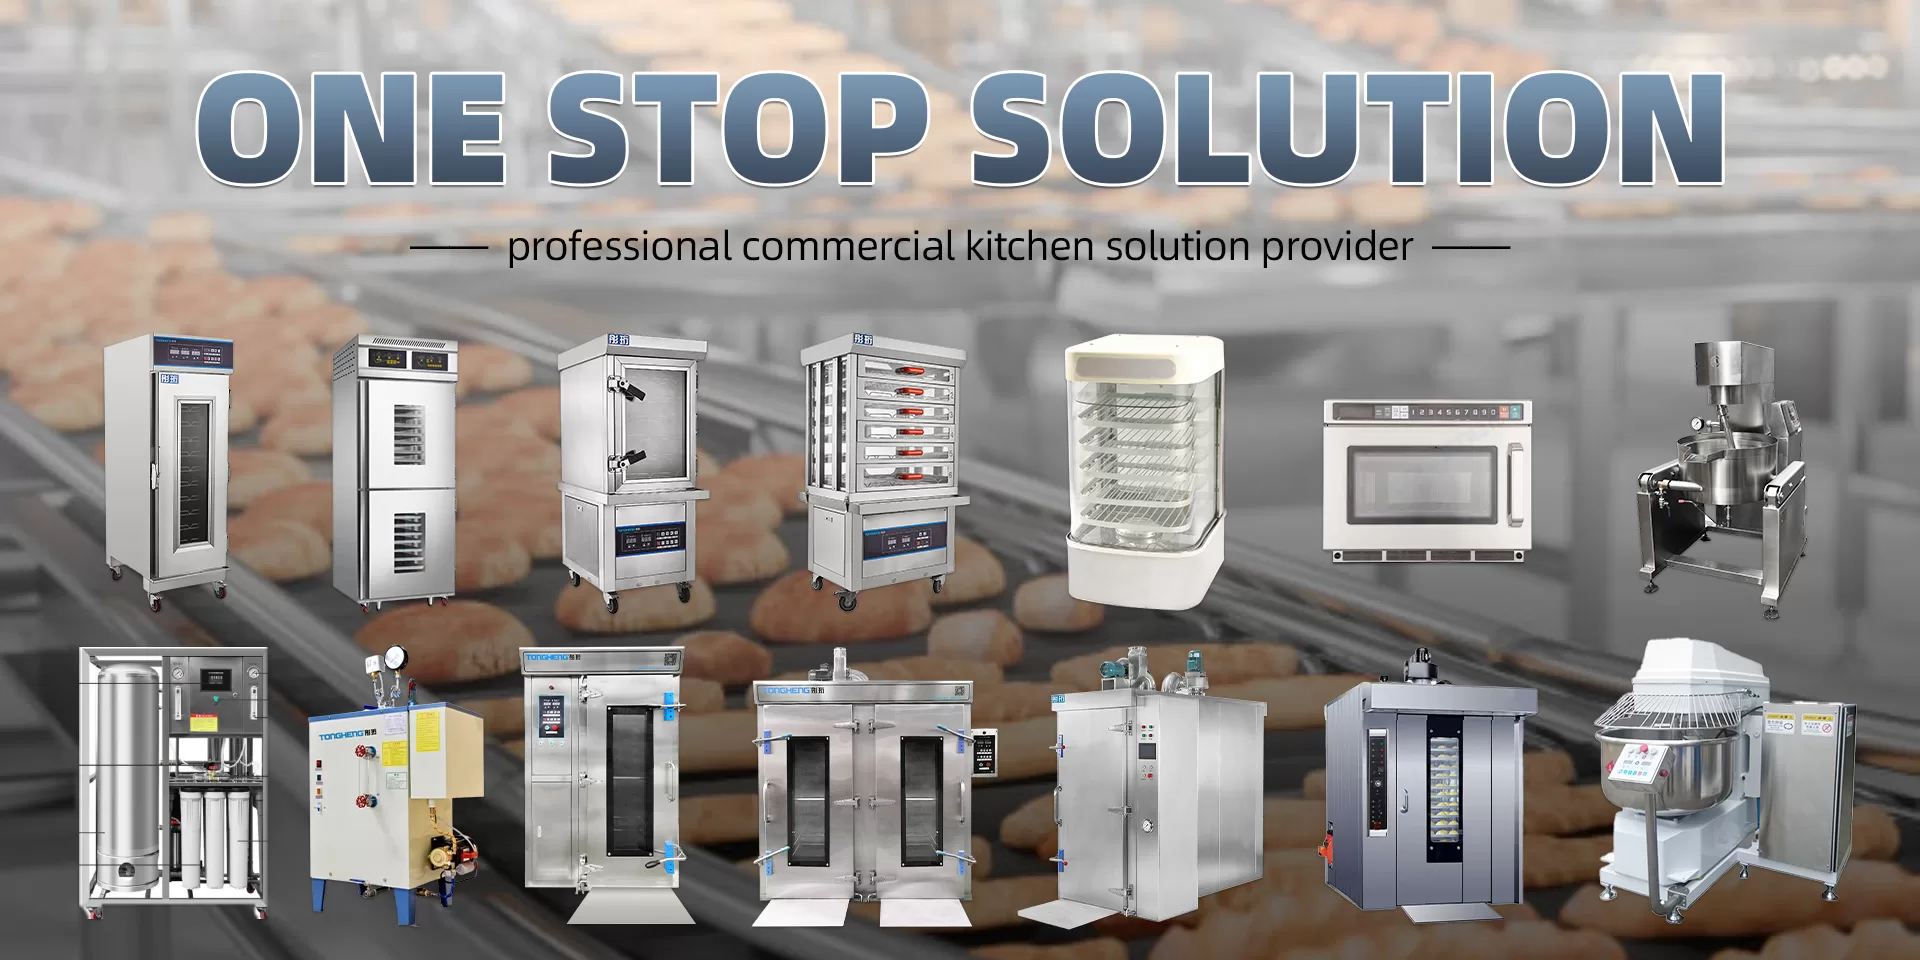 ONE STOP SOLUTION,professional commercial kitchen solution provider